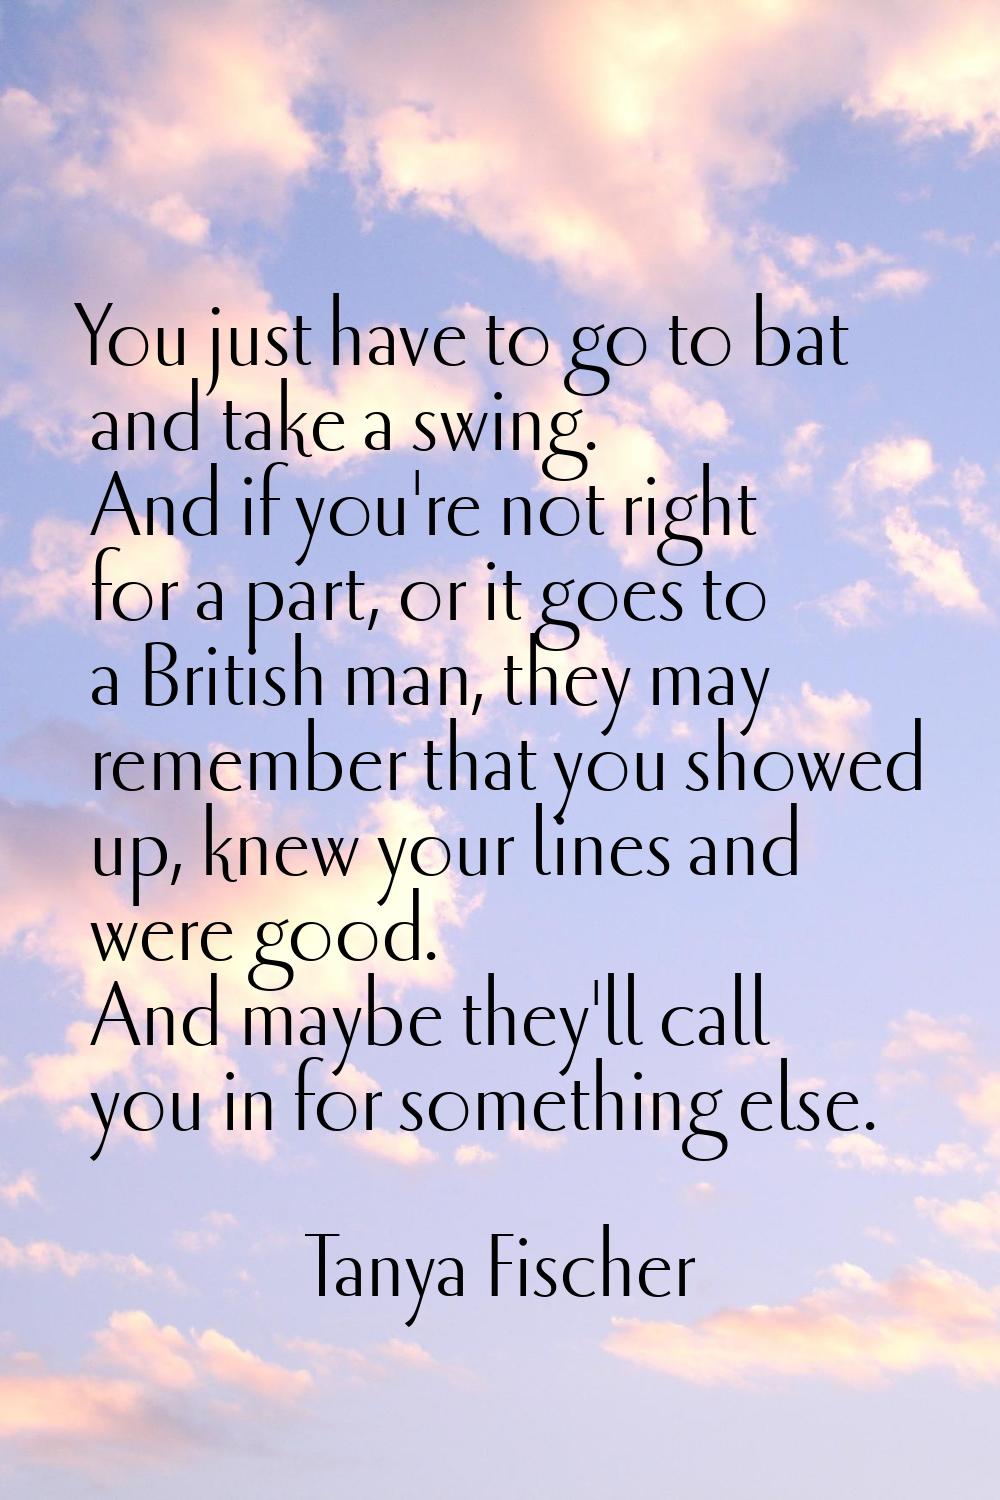 You just have to go to bat and take a swing. And if you're not right for a part, or it goes to a Br